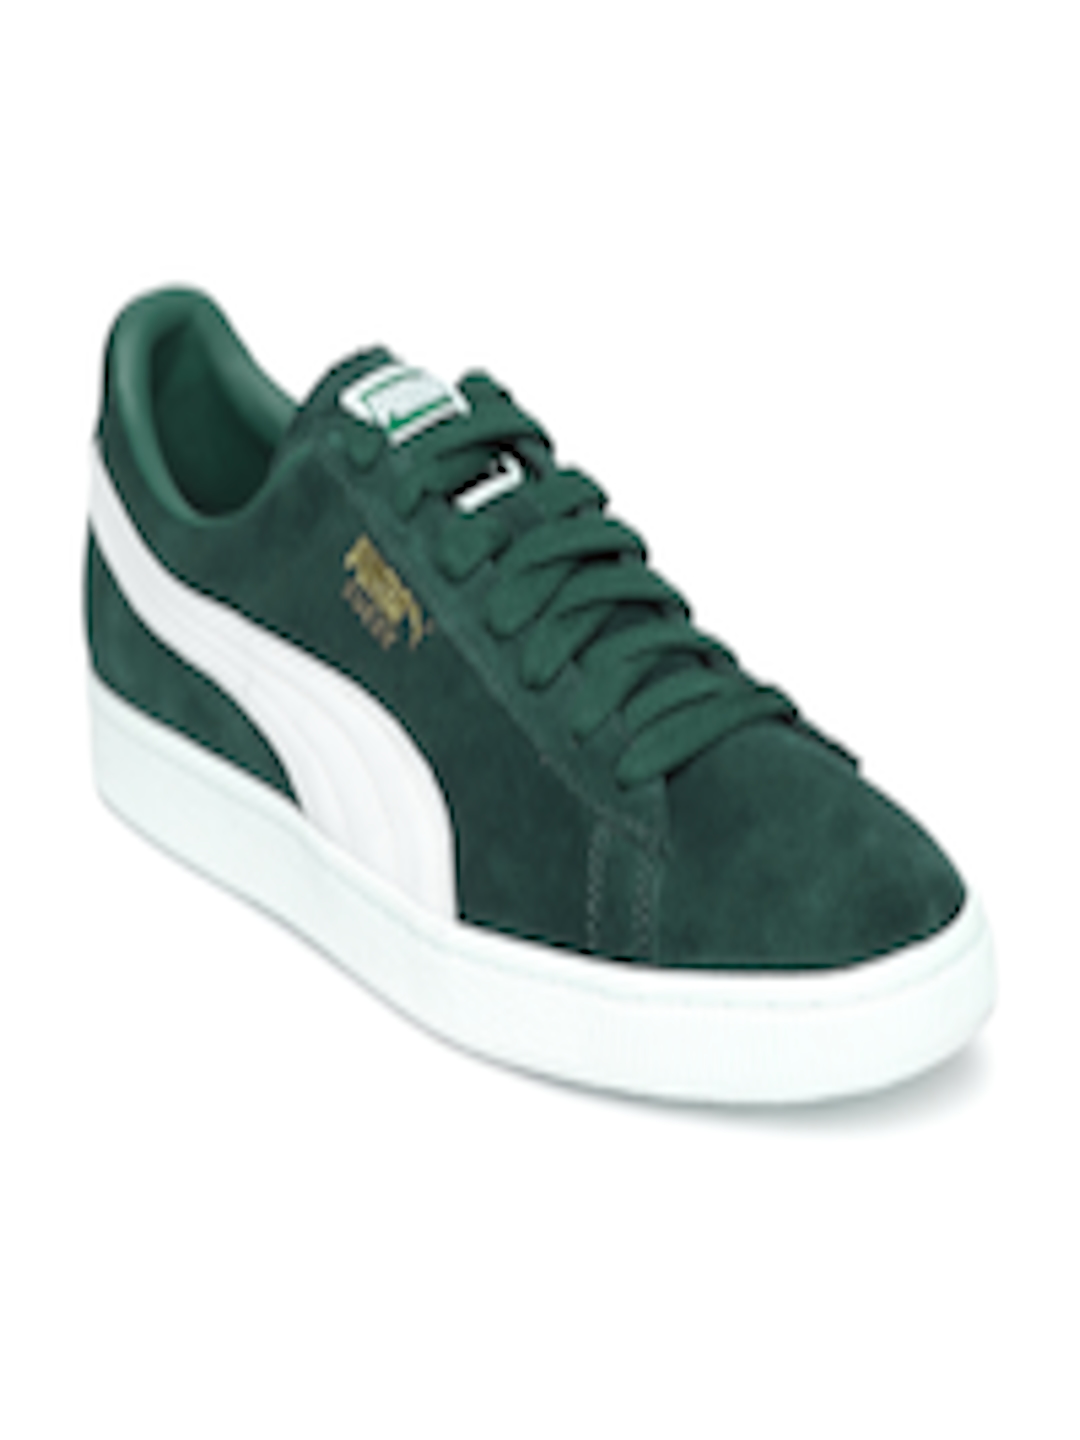 Buy PUMA Men Green Suede Classic Sneakers - Casual Shoes for Men